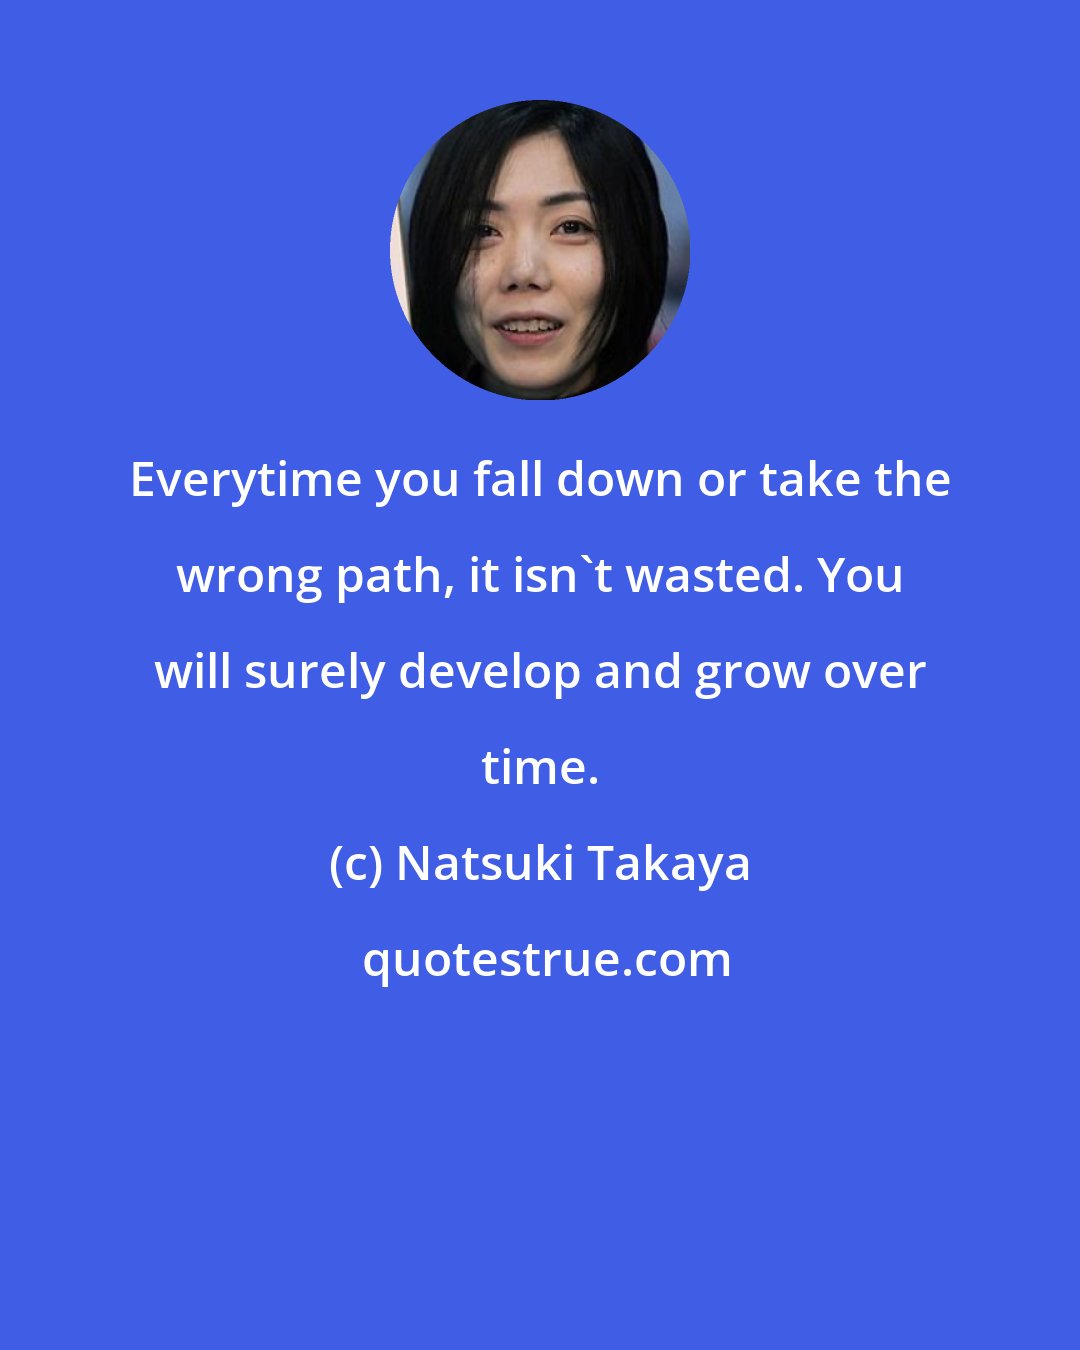 Natsuki Takaya: Everytime you fall down or take the wrong path, it isn't wasted. You will surely develop and grow over time.